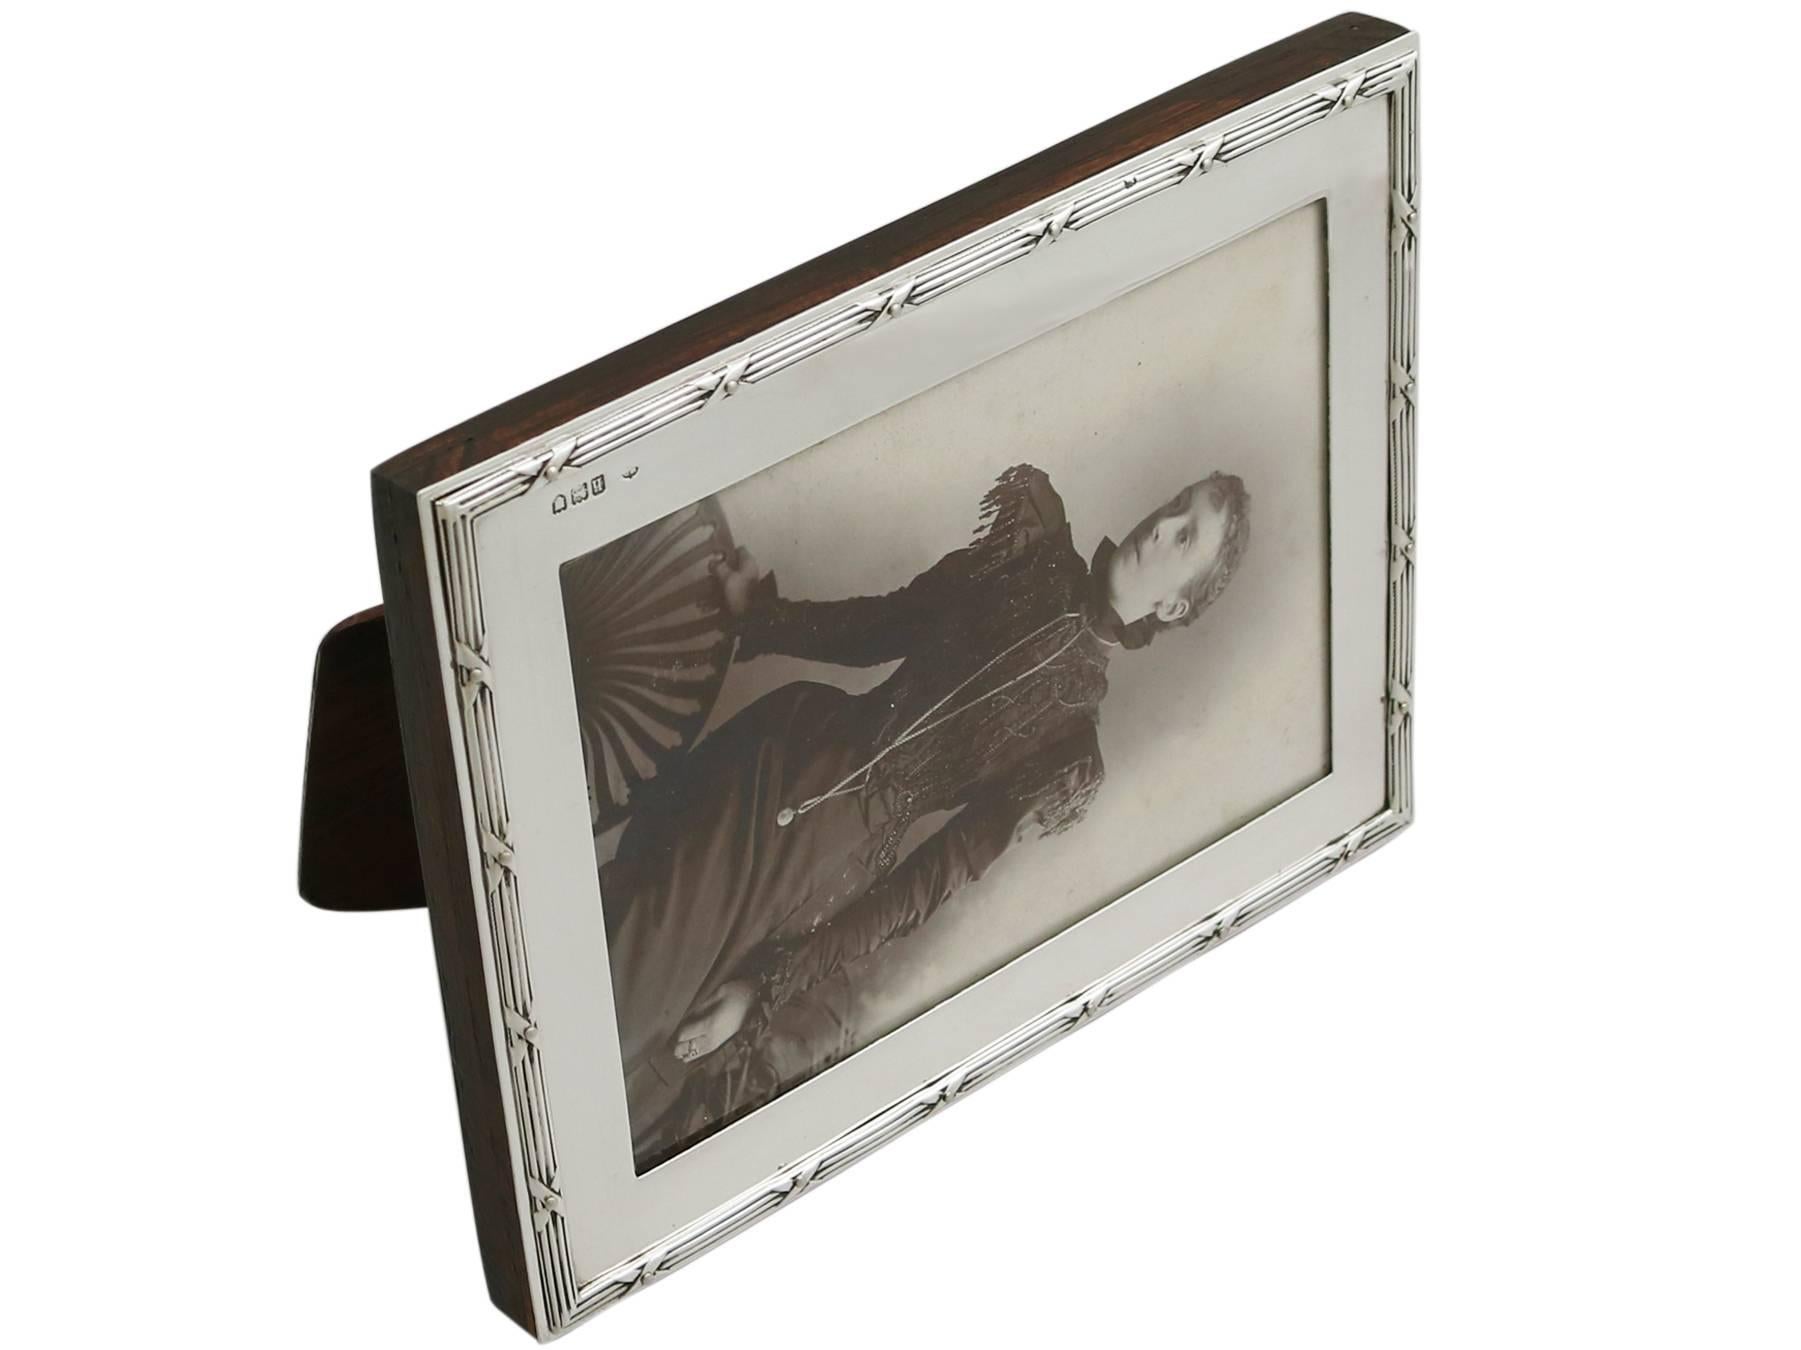 An exceptional, fine and impressive antique Edwardian English sterling silver photograph frame made by William Comyns & Sons; an addition to AC Silver's ornamental silverware collection.

This exceptional antique Edwardian sterling silver